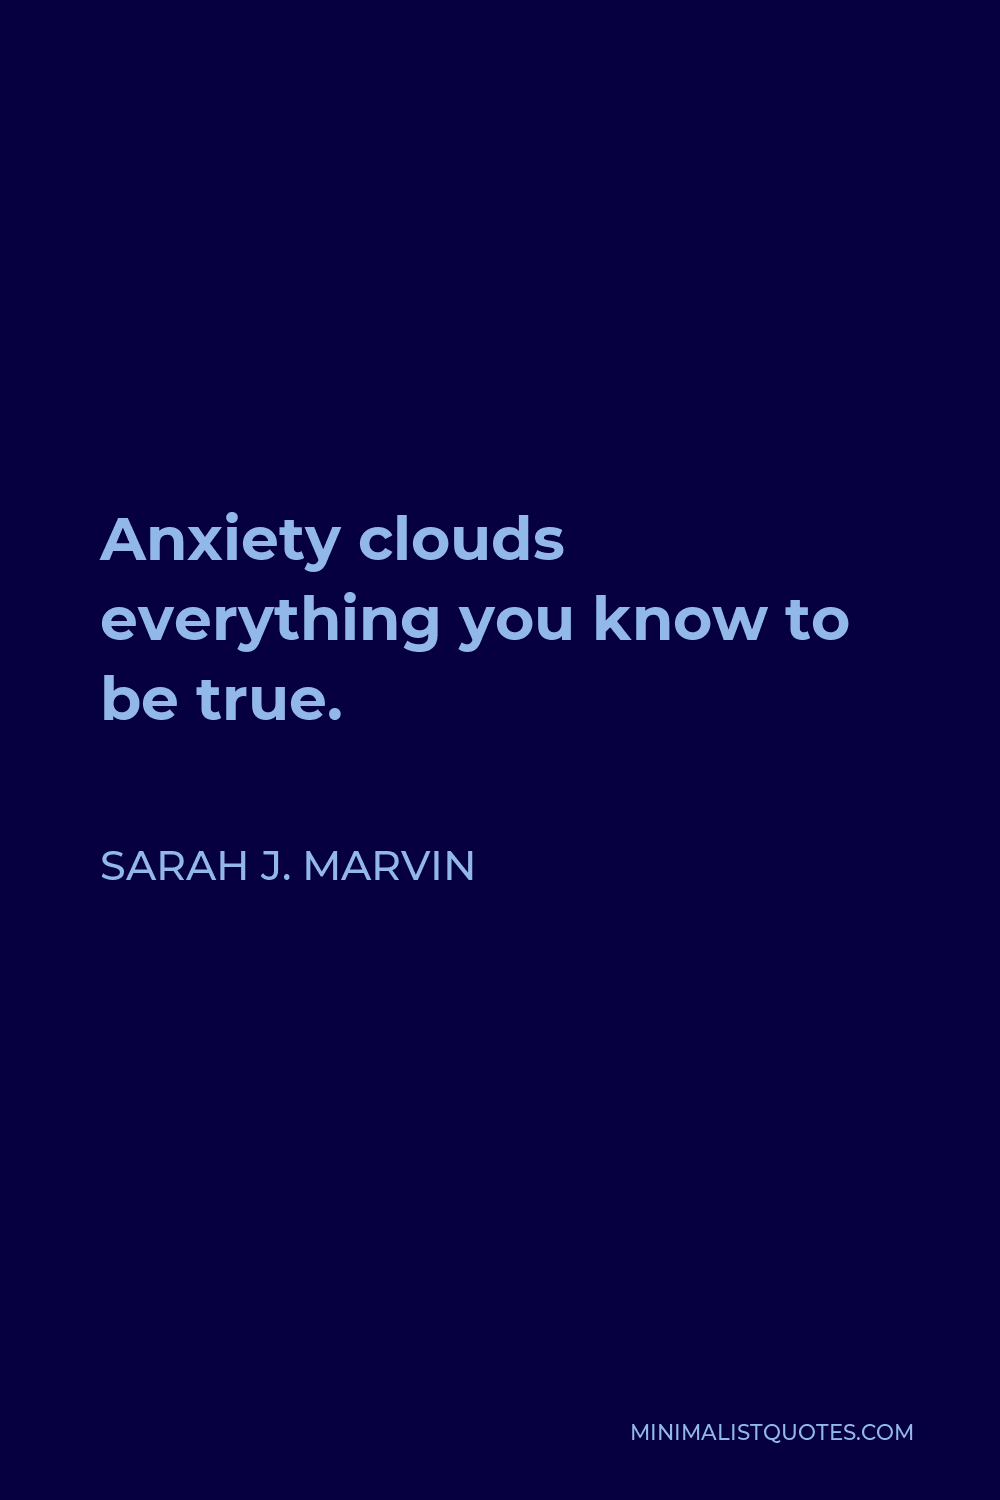 Sarah J. Marvin Quote - Anxiety clouds everything you know to be true.